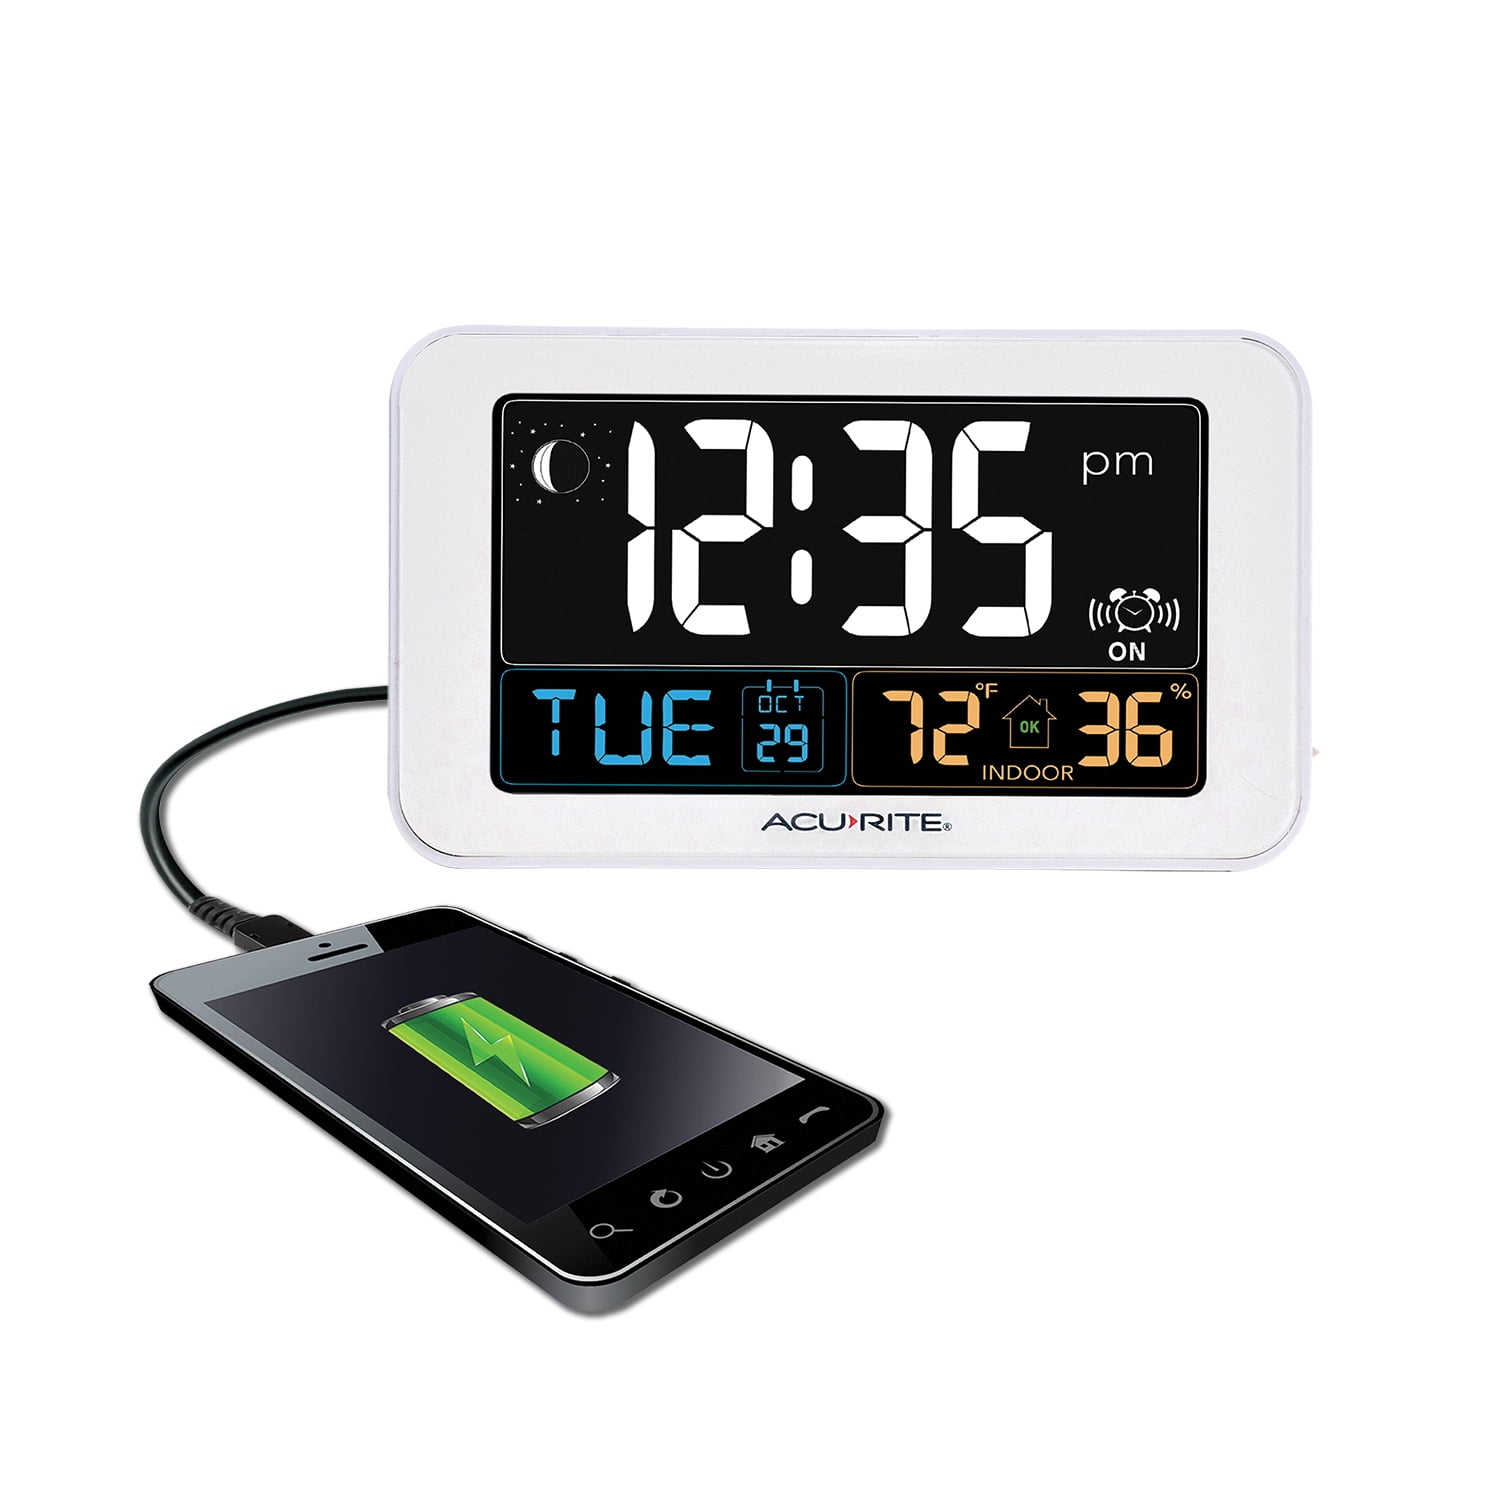 Travel Multifunction Digital Alarm with Date Temperature Humidity Display 